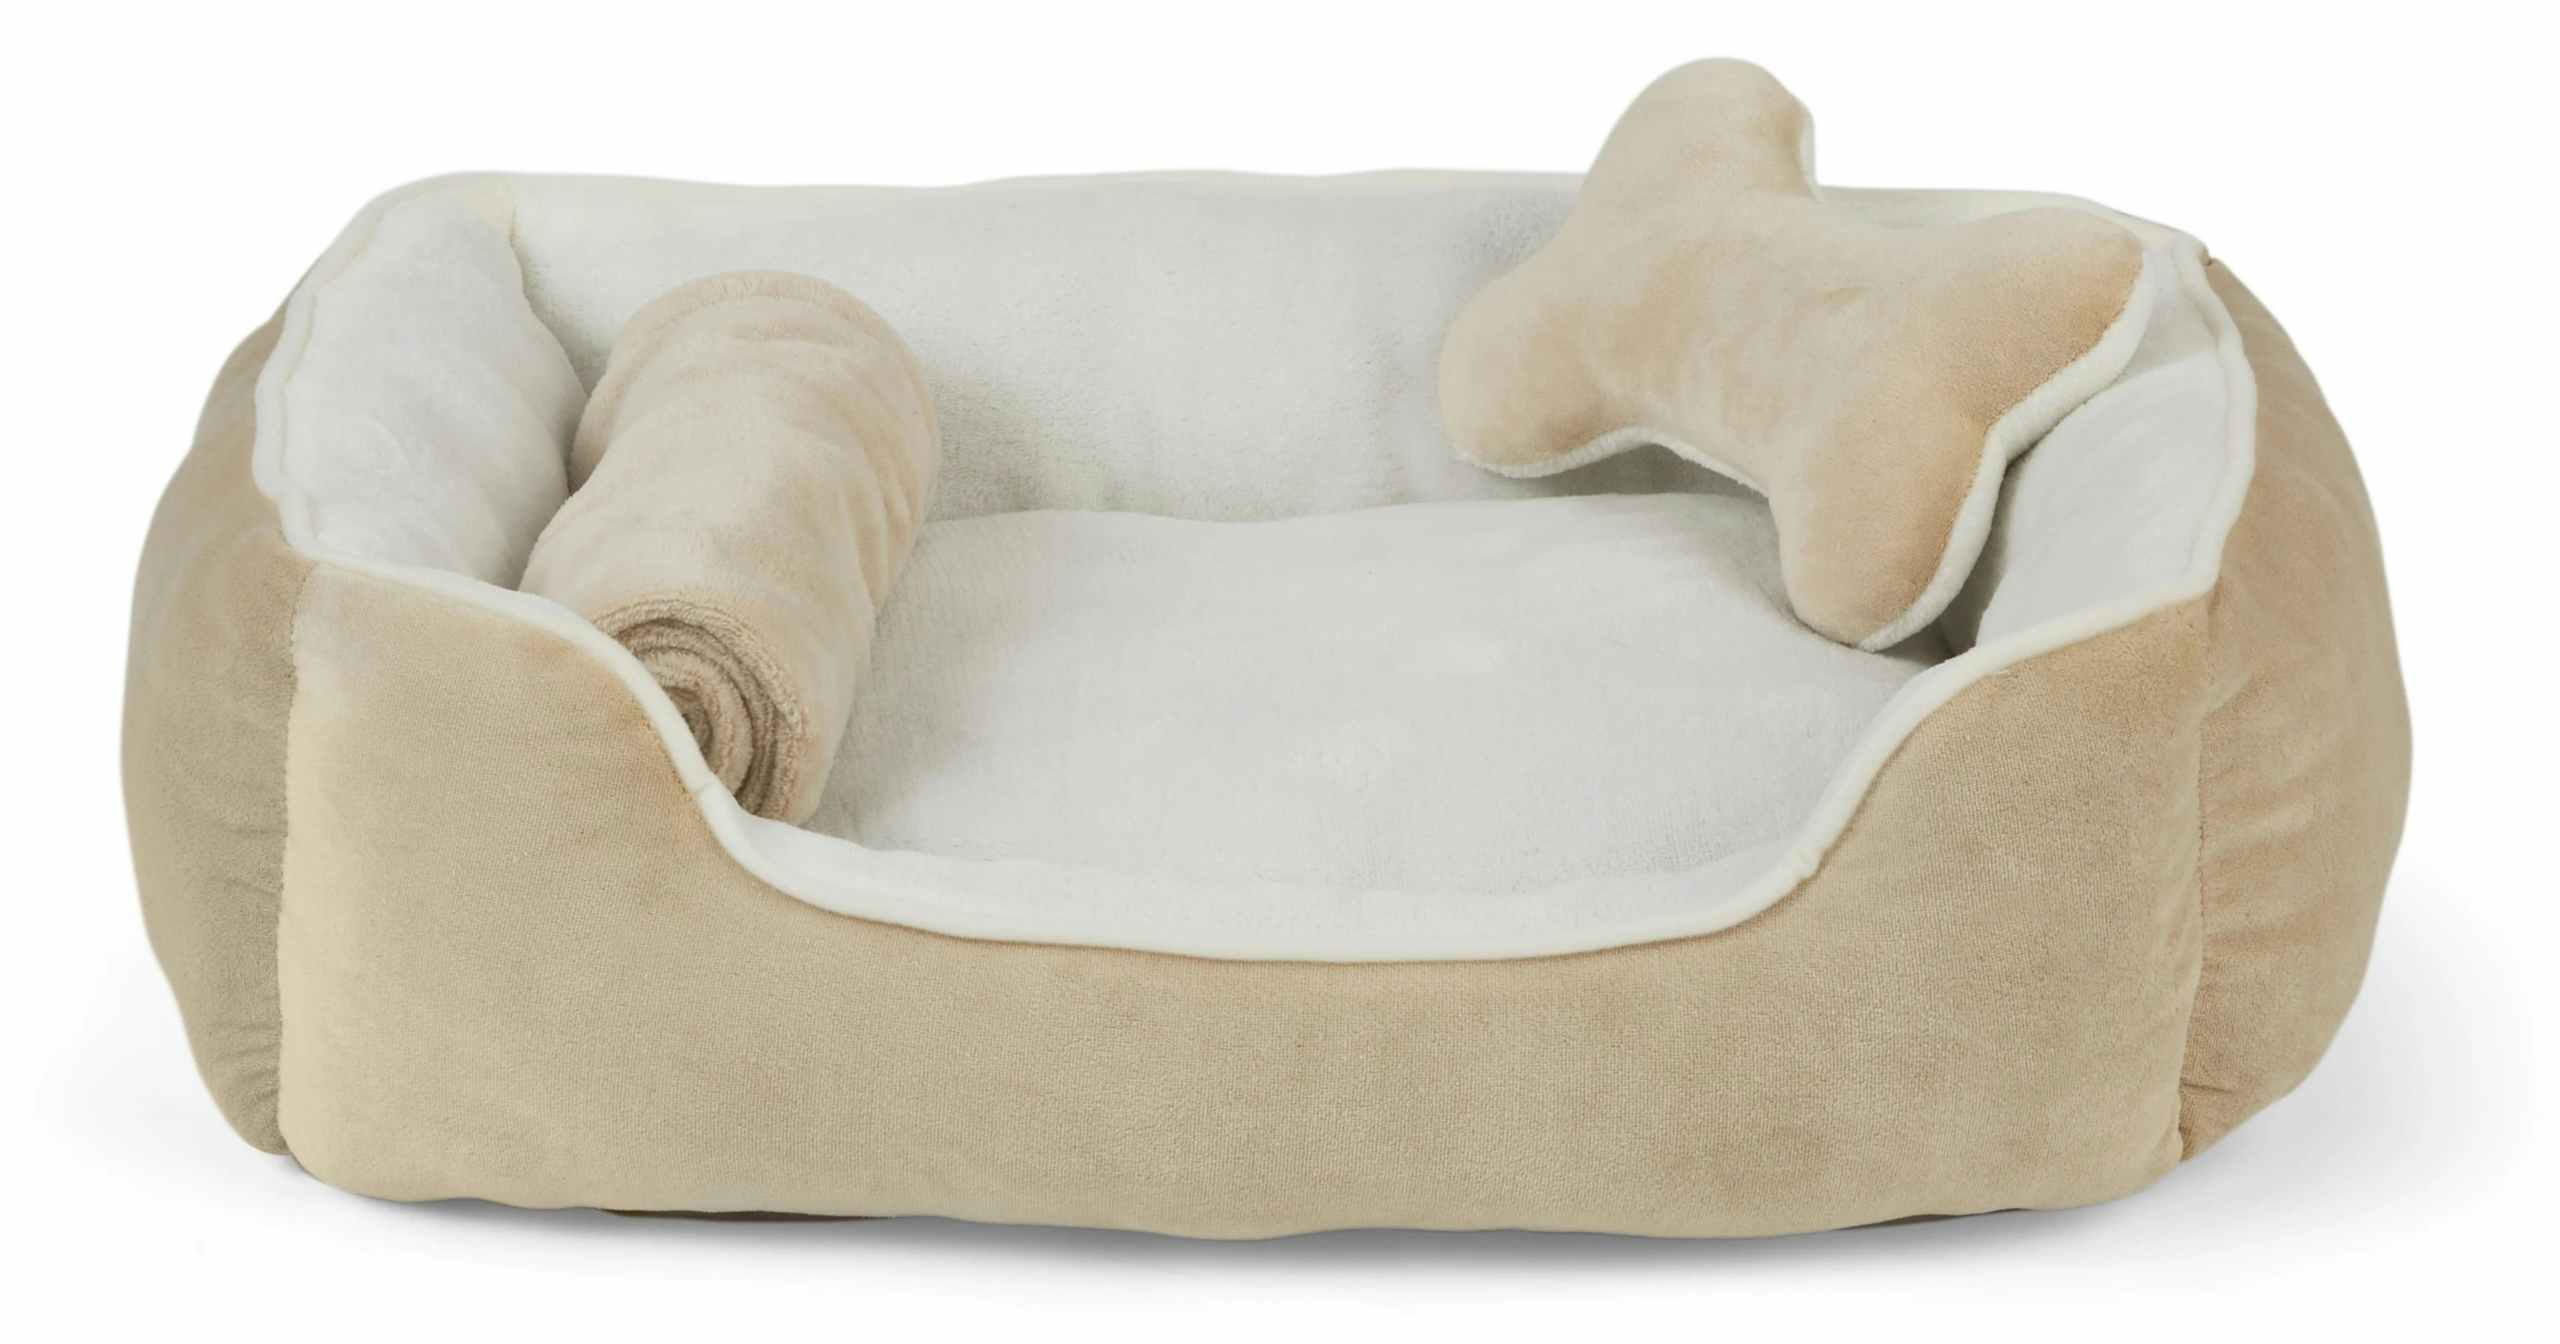 tan dog bed bundle with a bed, blanket, and pillow